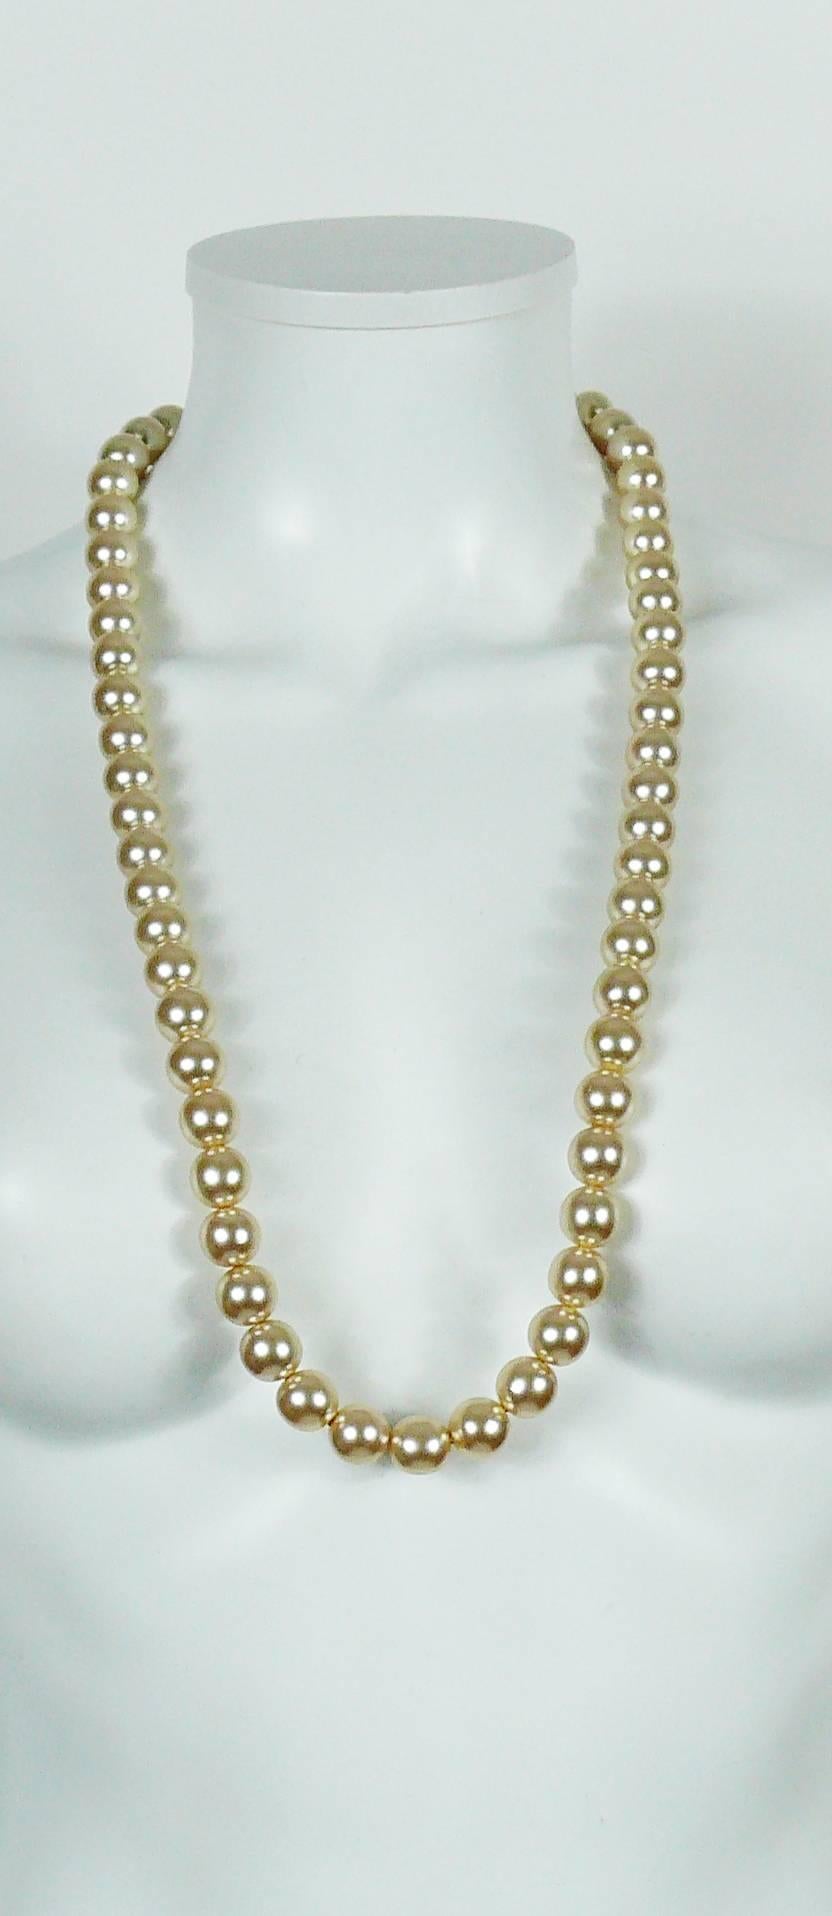 CELINE vintage large pearls necklace featuring a gold toned signature T-bar and ring clasp.

Can be worn as a necklace or a belt.

T-bar closure.
Embossed CELINE PARIS on the ring.

Indicative measurements : total length approx. 83.5 cm (32.87